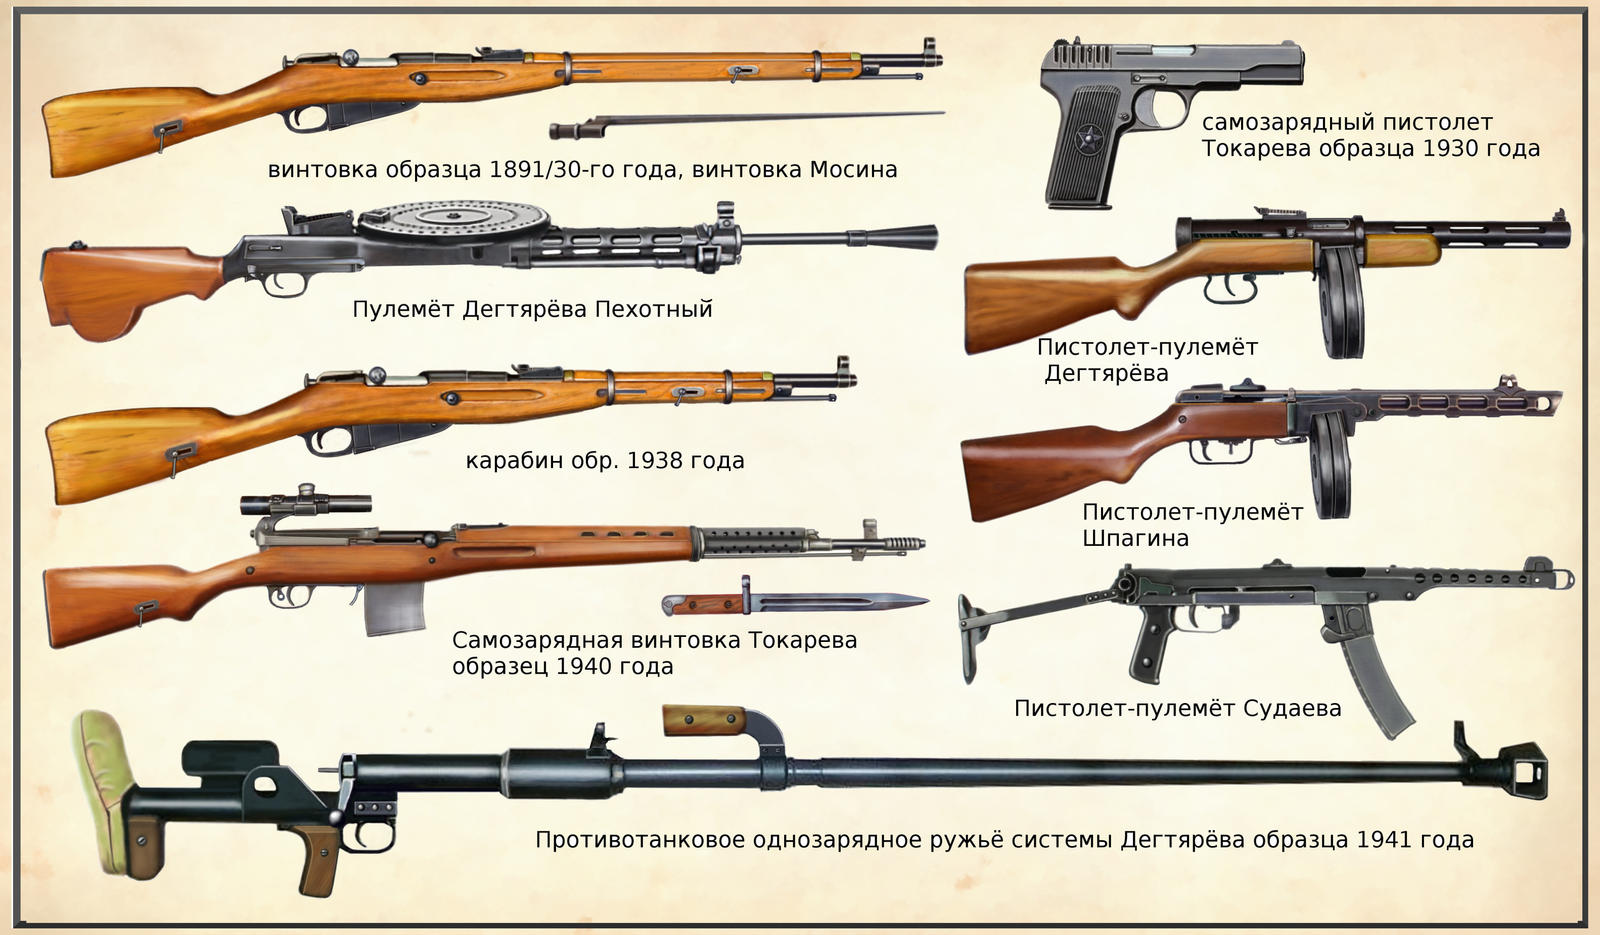 Ww2 Soviet Union Infantry Weapons By Andreasilva60 On Deviantart